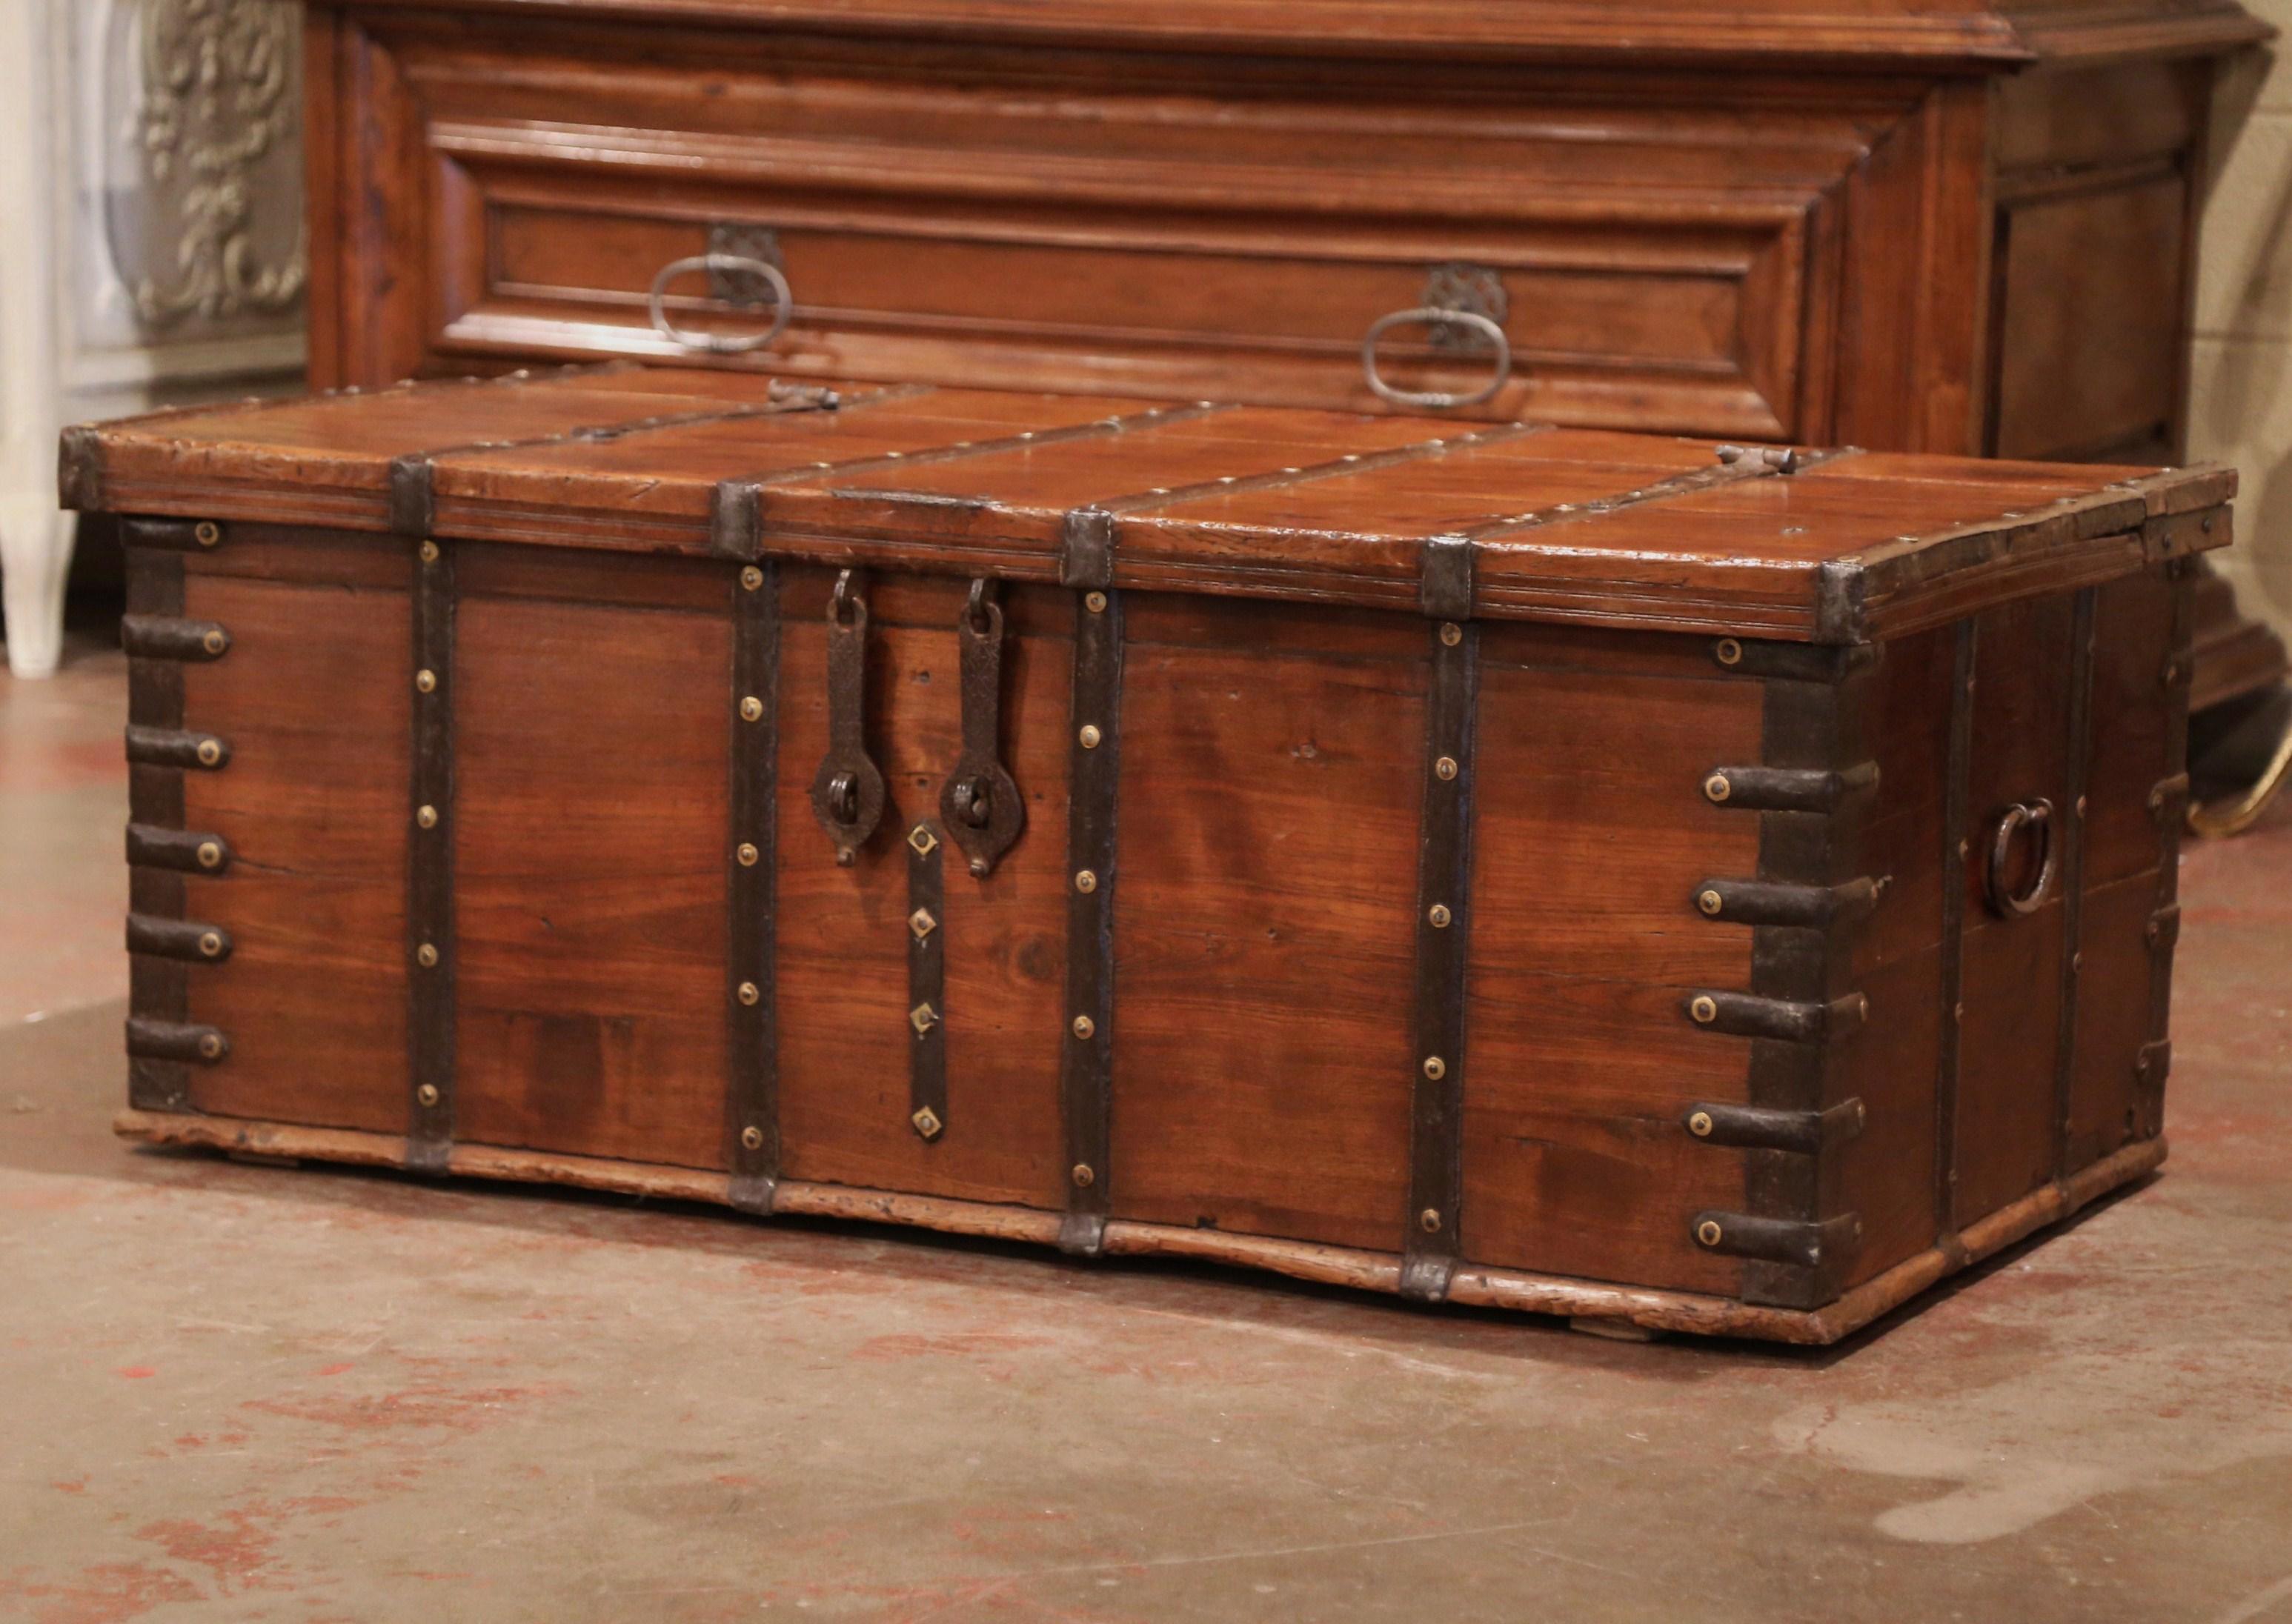 This large antique fruitwood coffee table trunk was crafted in England, circa 1870. The wooden blanket chest is finished on all four sides, and is decorated with metal strapping with decorative brass nail heads; it is further embellished with